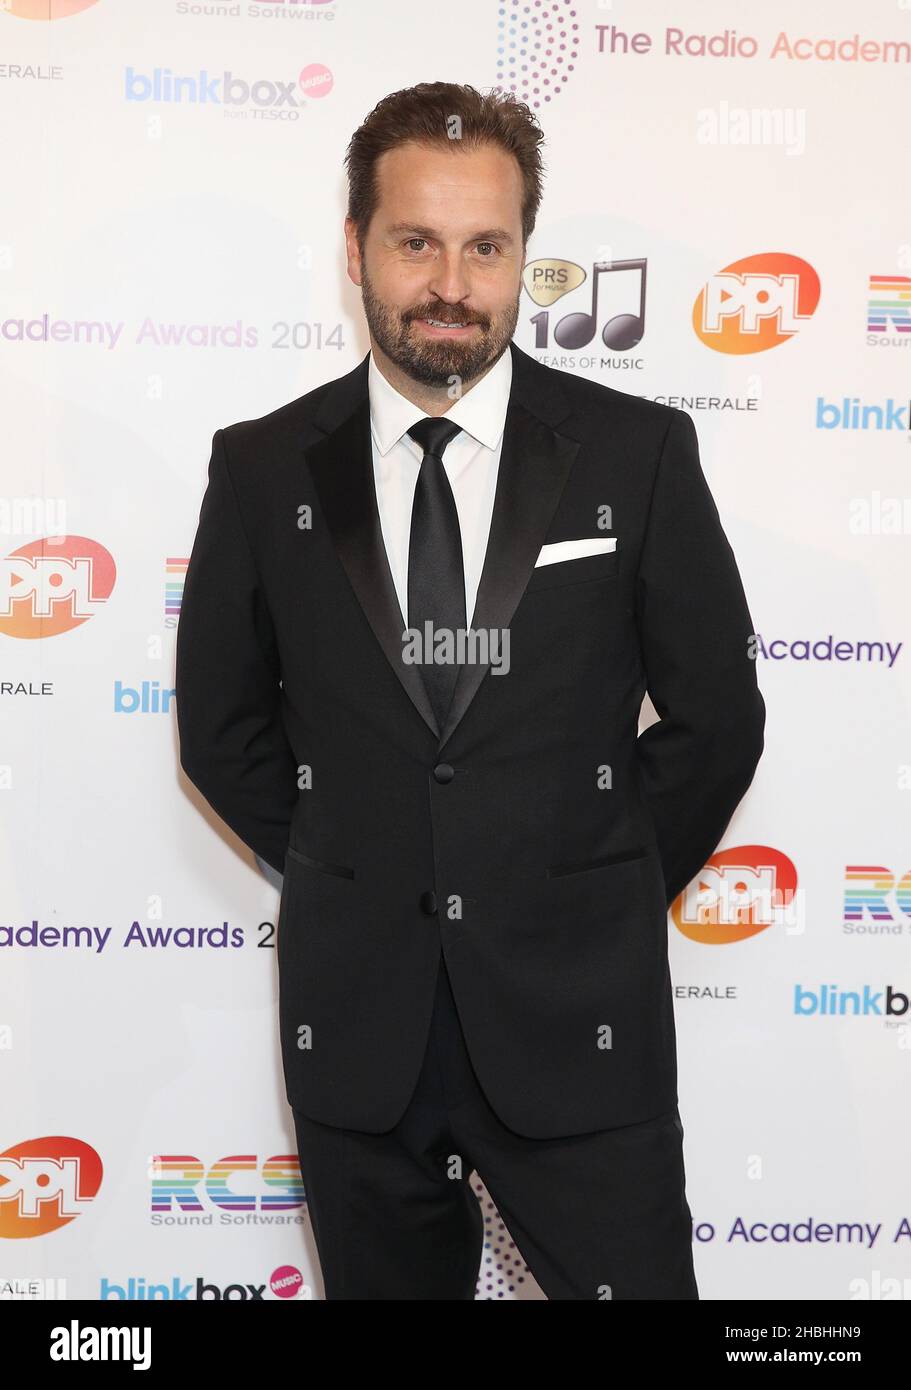 Alfie Boe attends The Radio Academy Awards at the Grosvenor House Hotel in London. Stock Photo